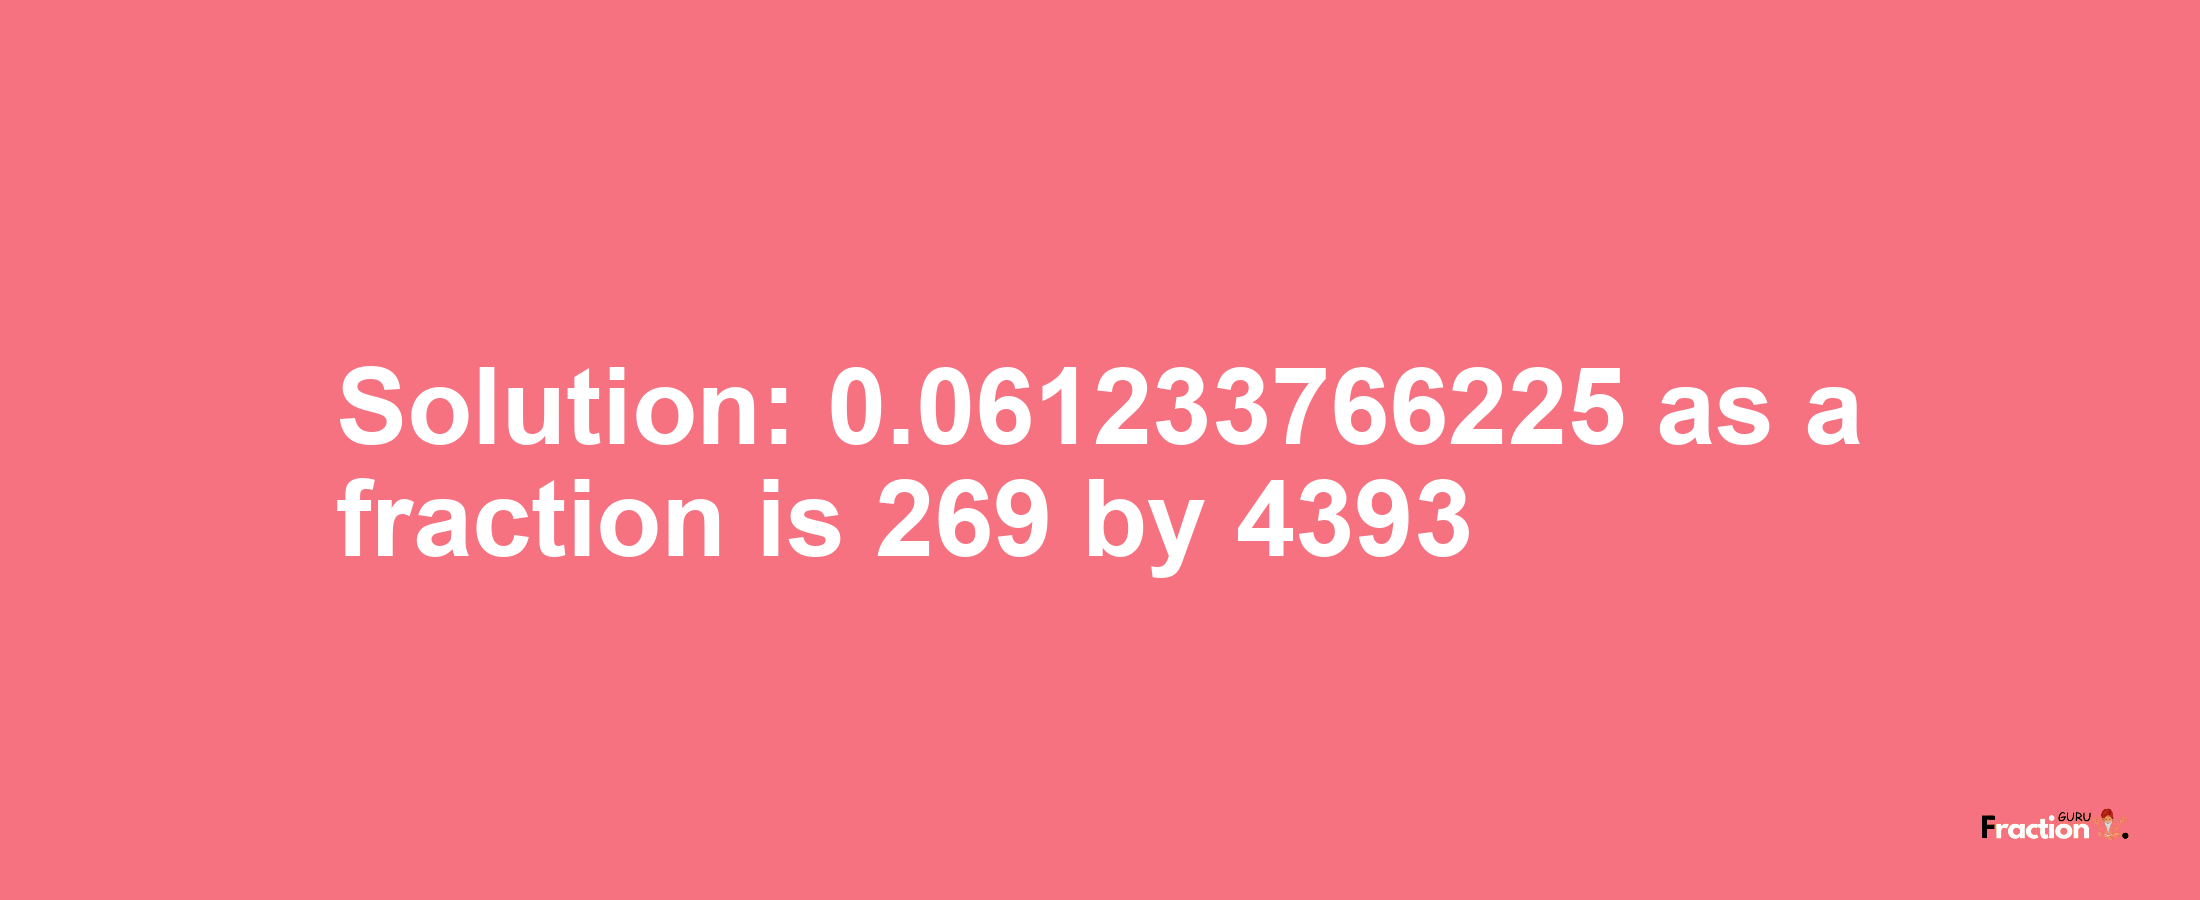 Solution:0.061233766225 as a fraction is 269/4393